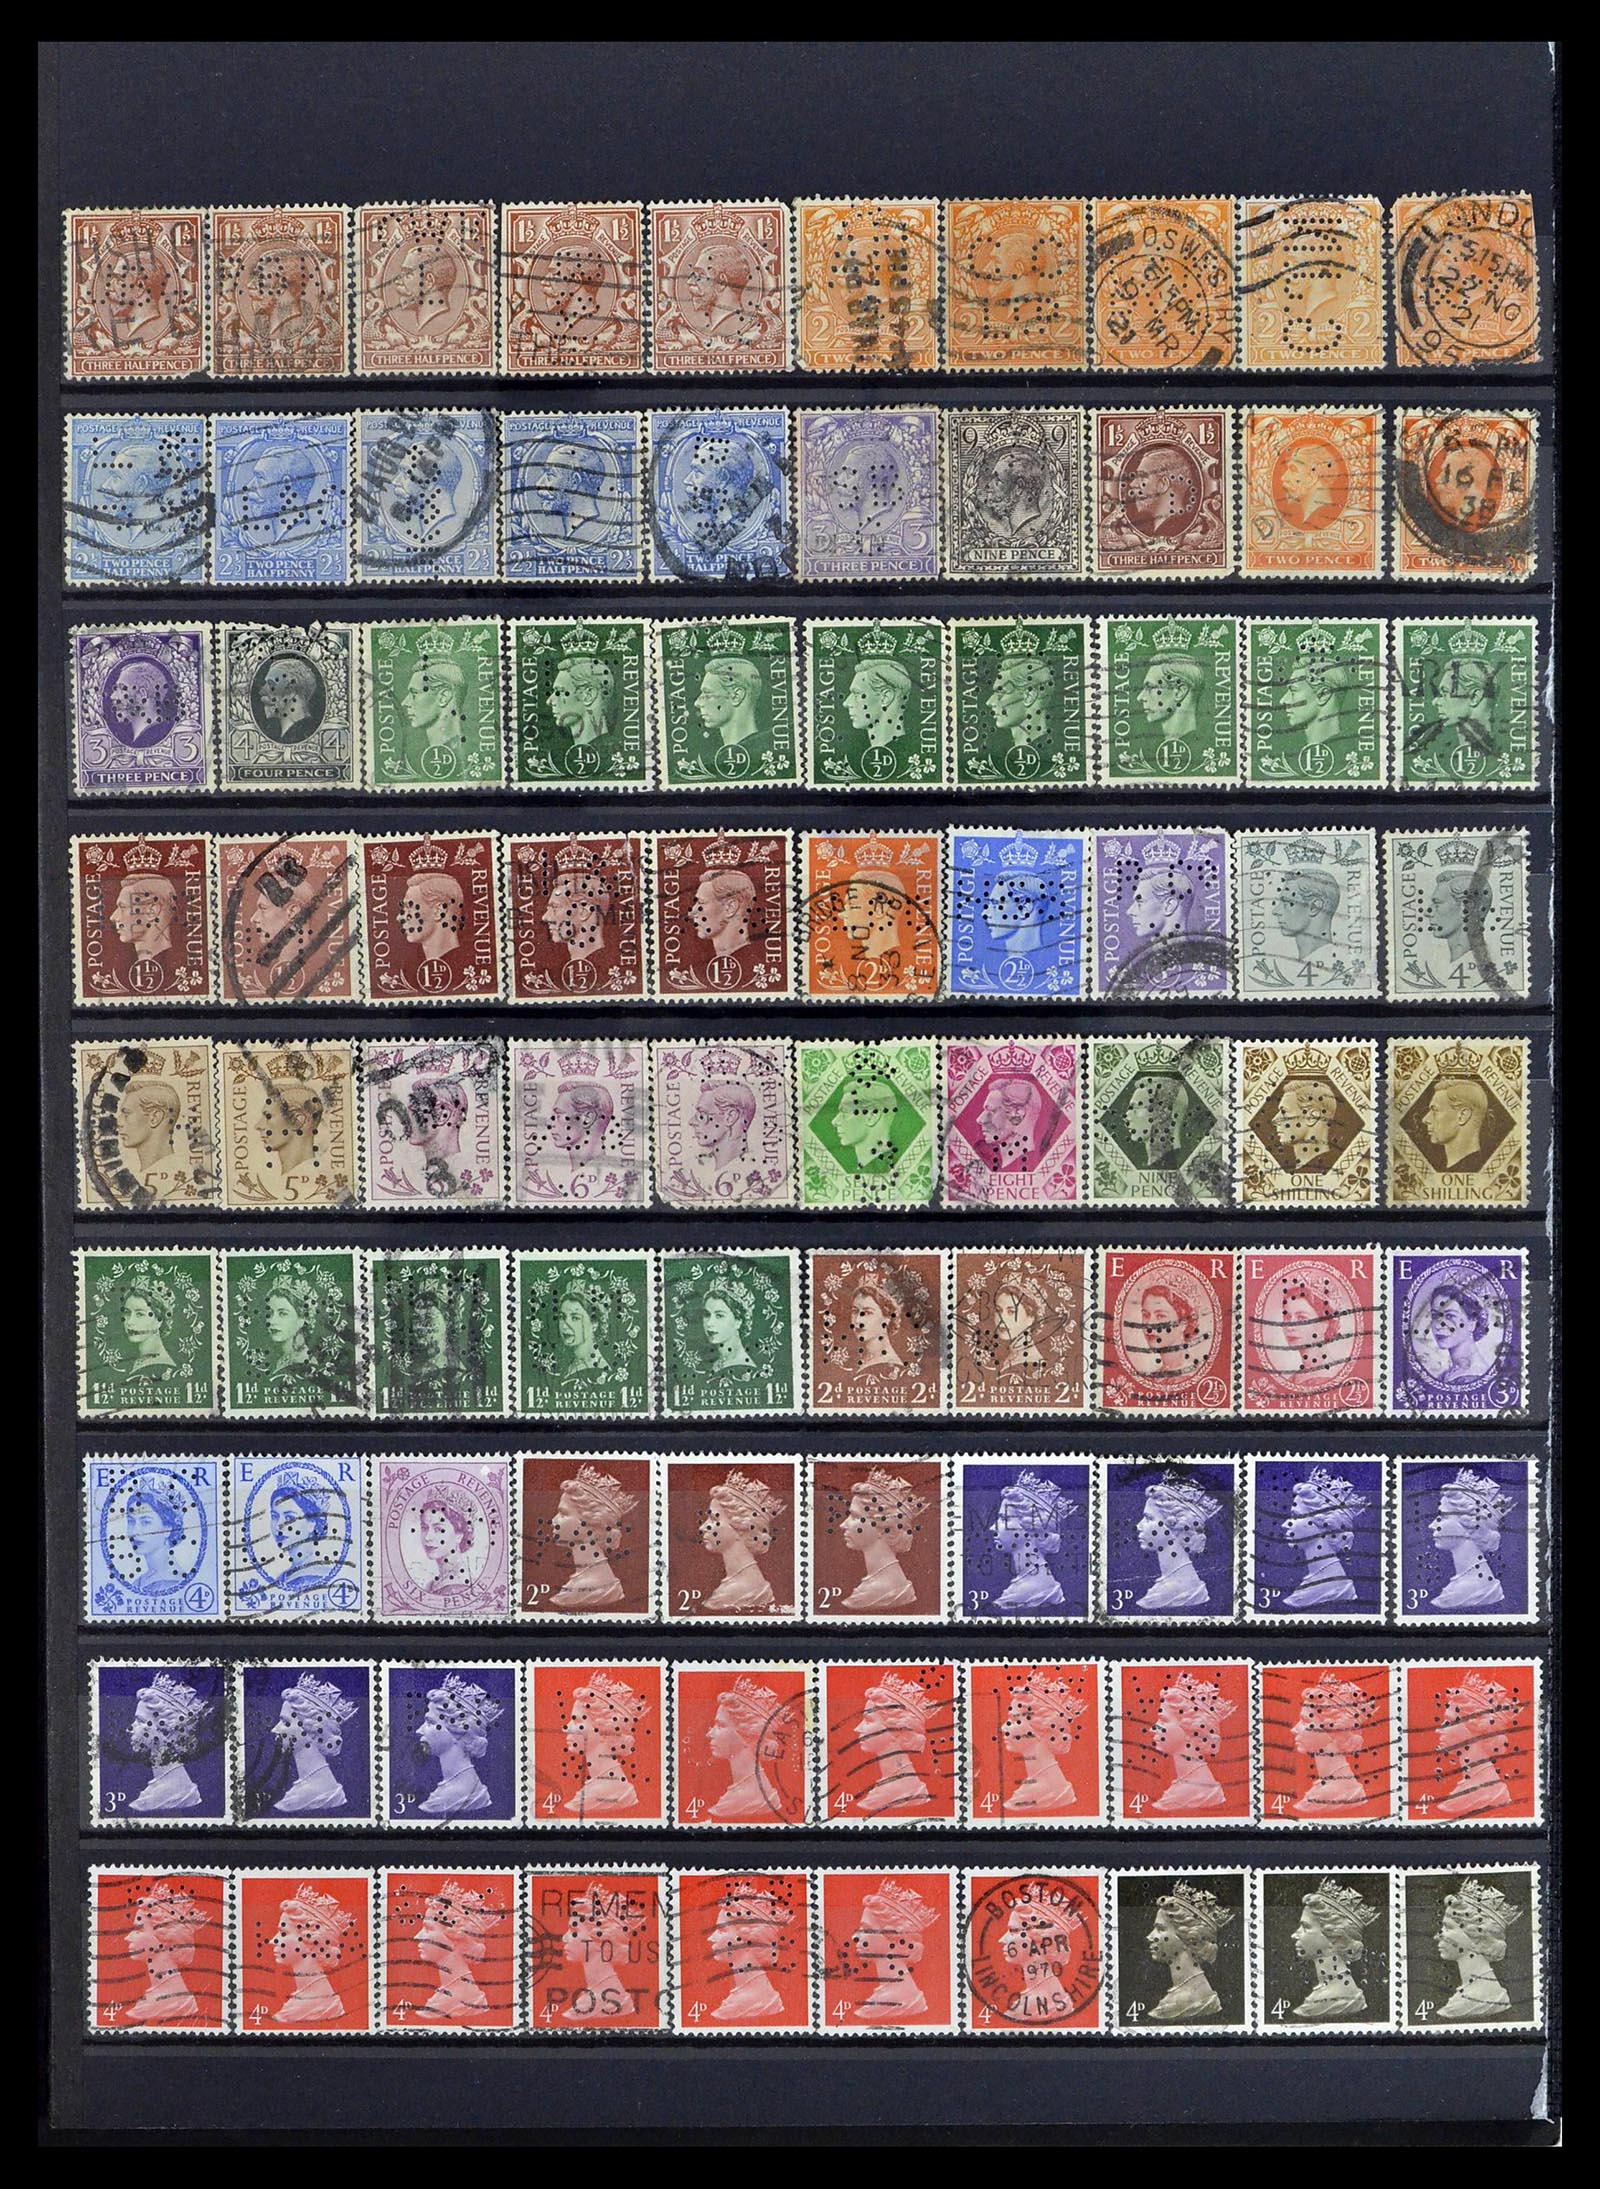 39196 0119 - Stamp collection 39196 Great Britain 1844-1955.